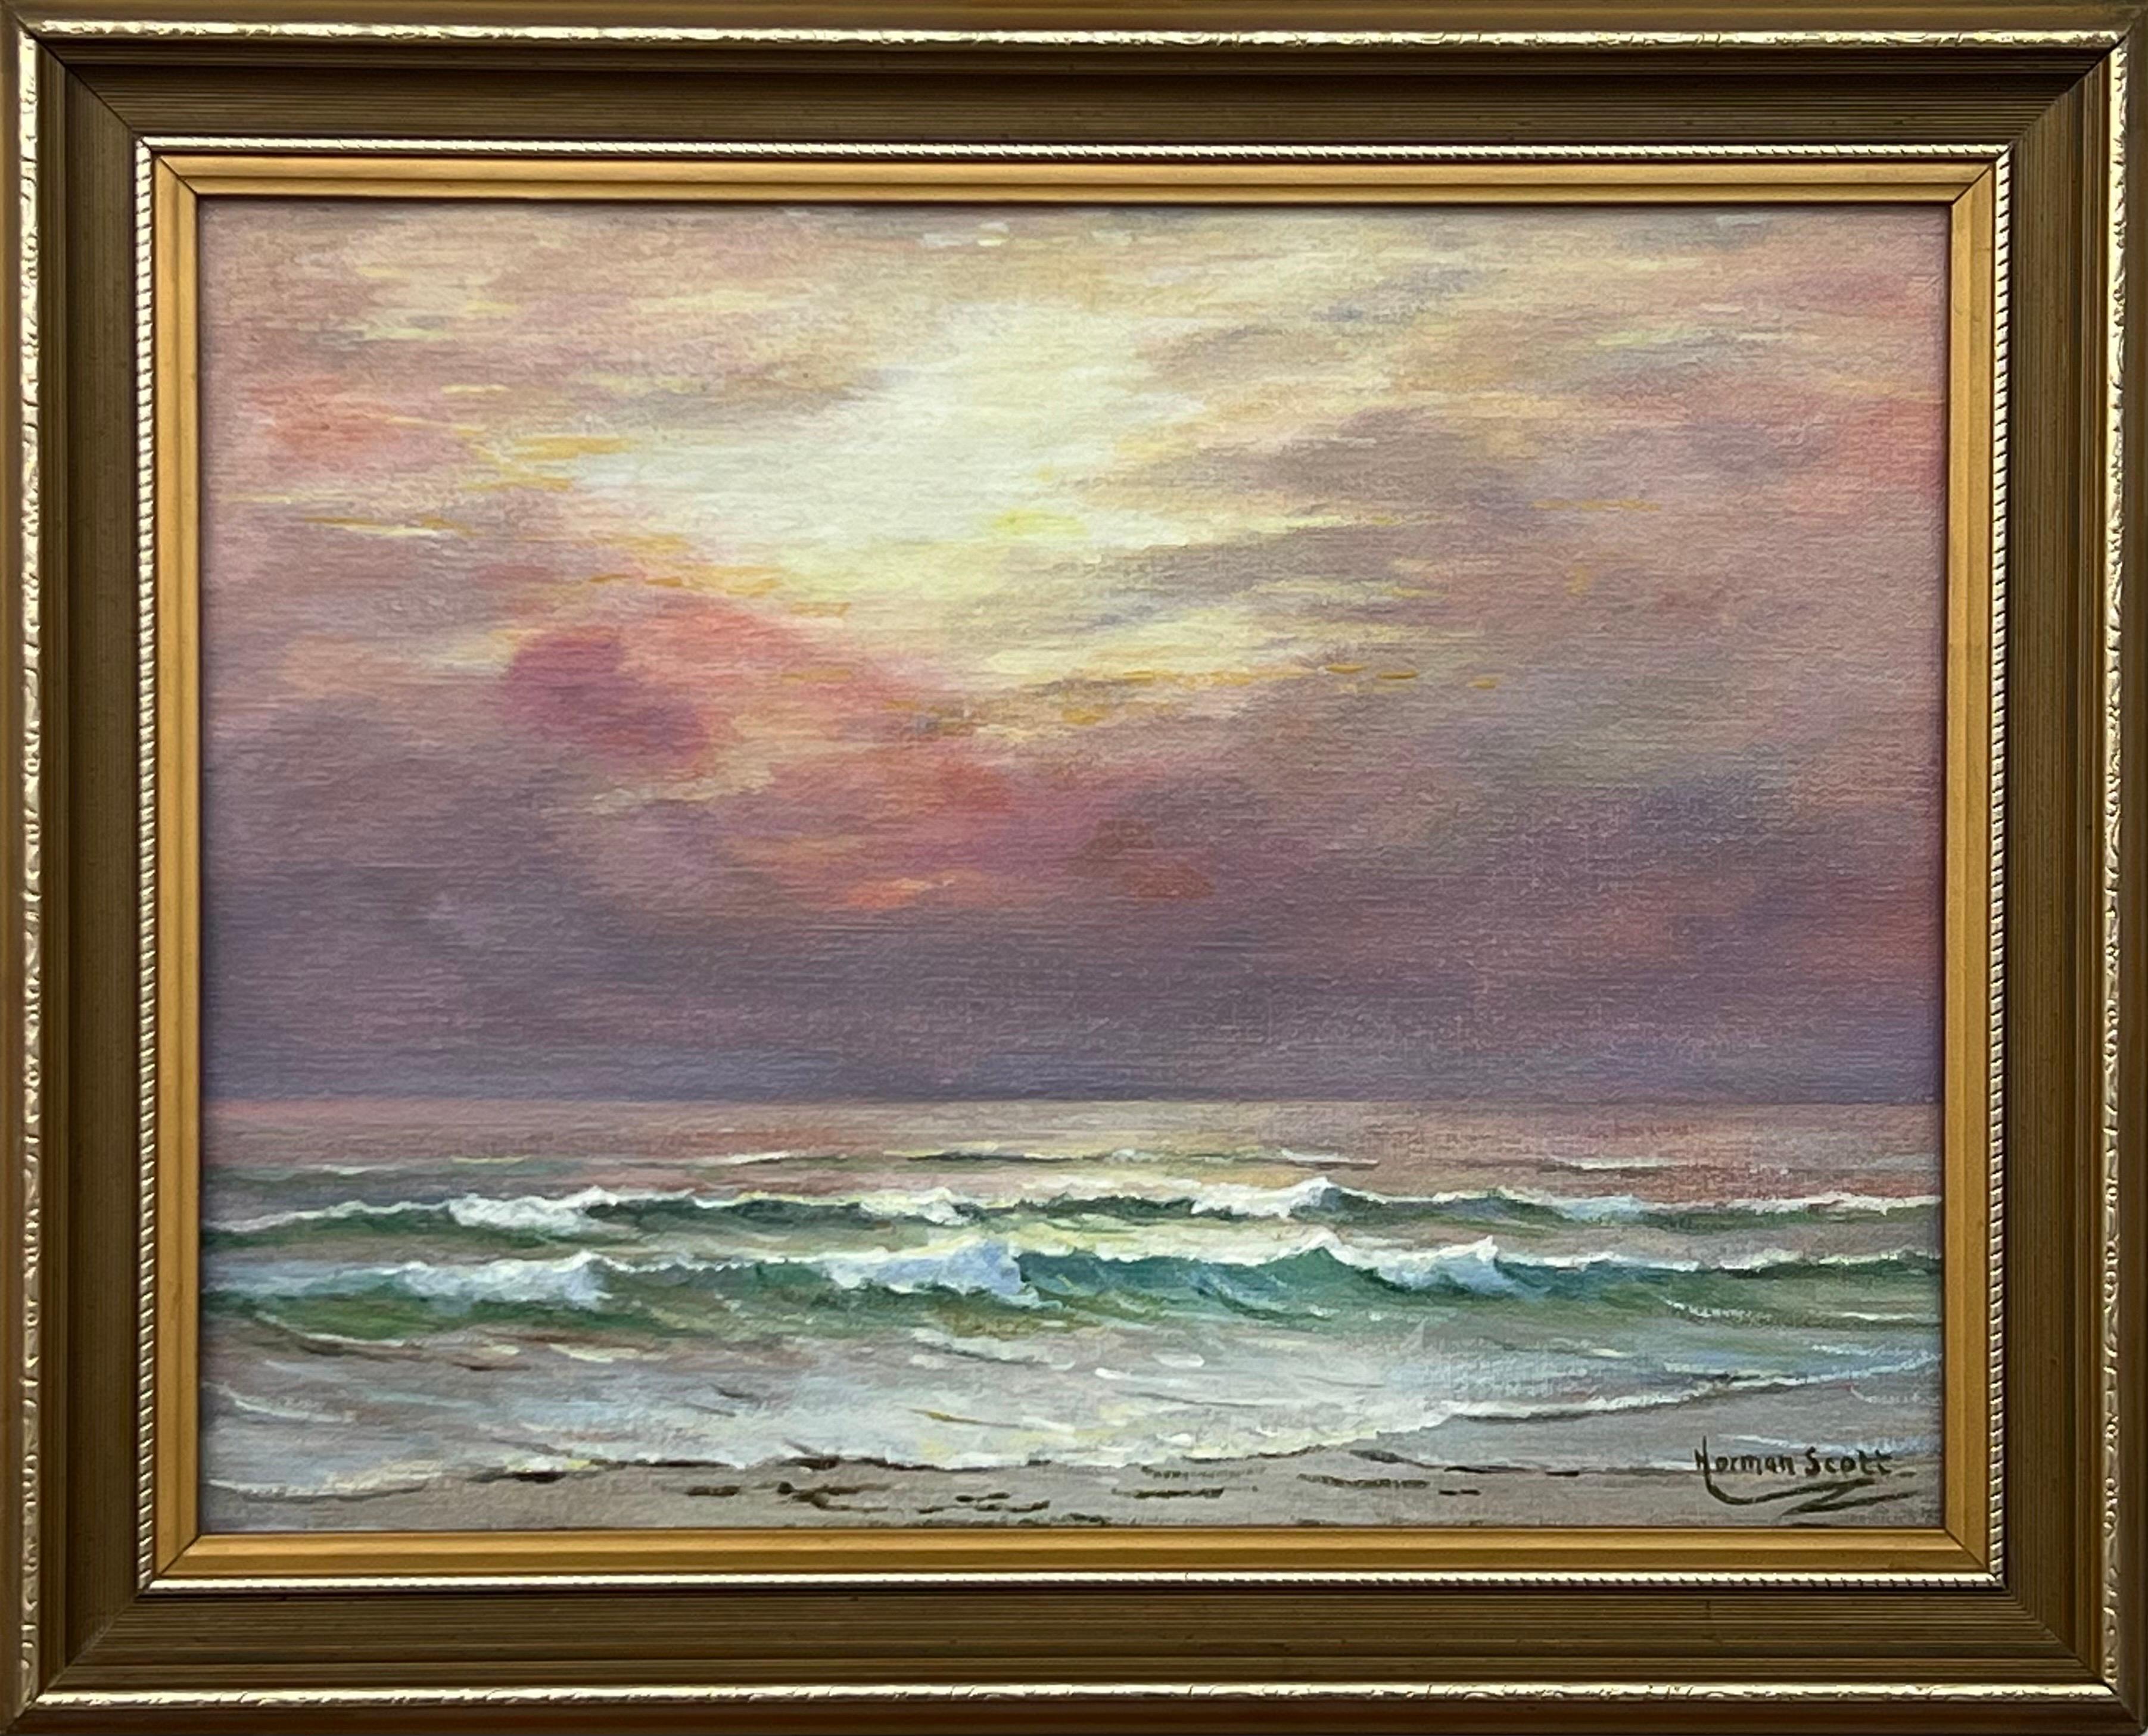 Dawn Seascape Painting with Pink Sky and Waves by 20th Century British Artist